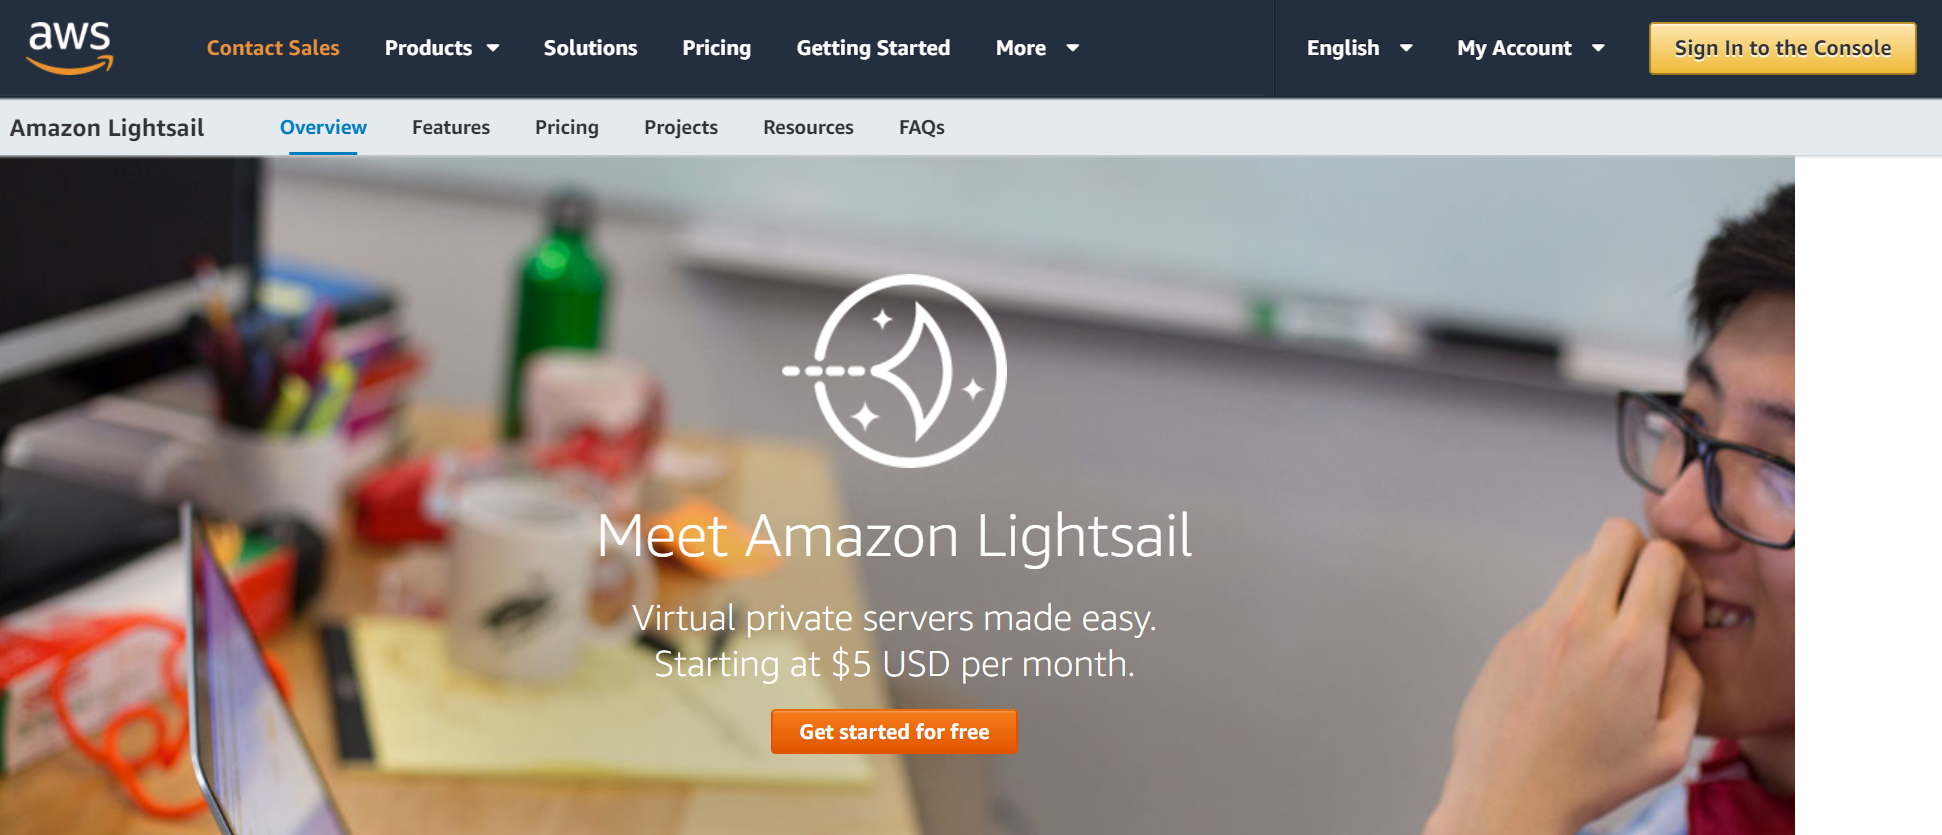 Amazon Lightsail welcome screen